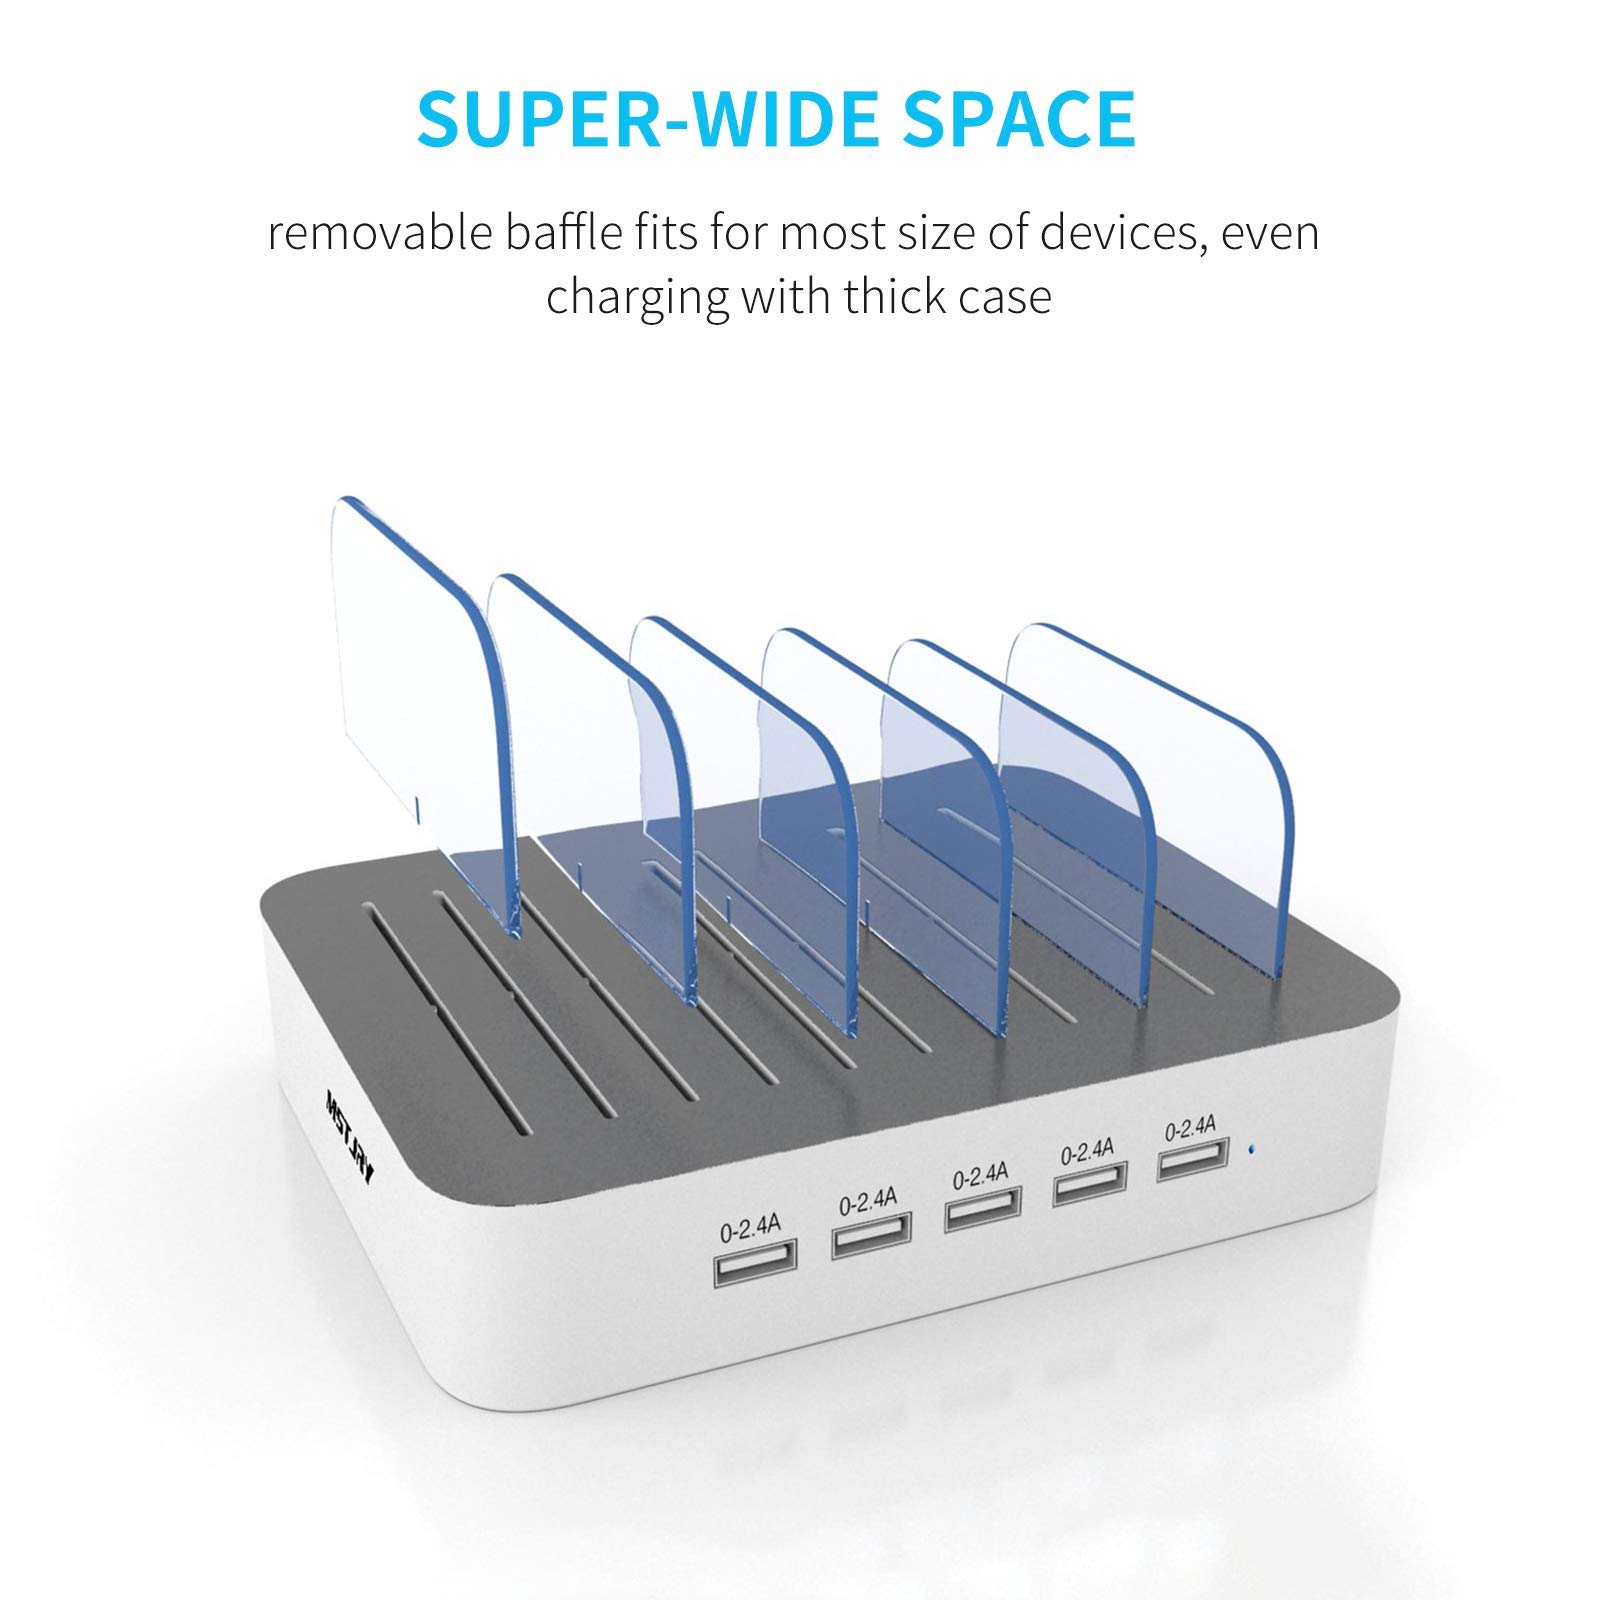 Charging Station for Multiple Devices, MSTJRY 5 Port Multi USB Charger Station with Power Switch Designed for iPhone iPad Cell Phone Tablets (White, 6 Mixed Short Cables Included)